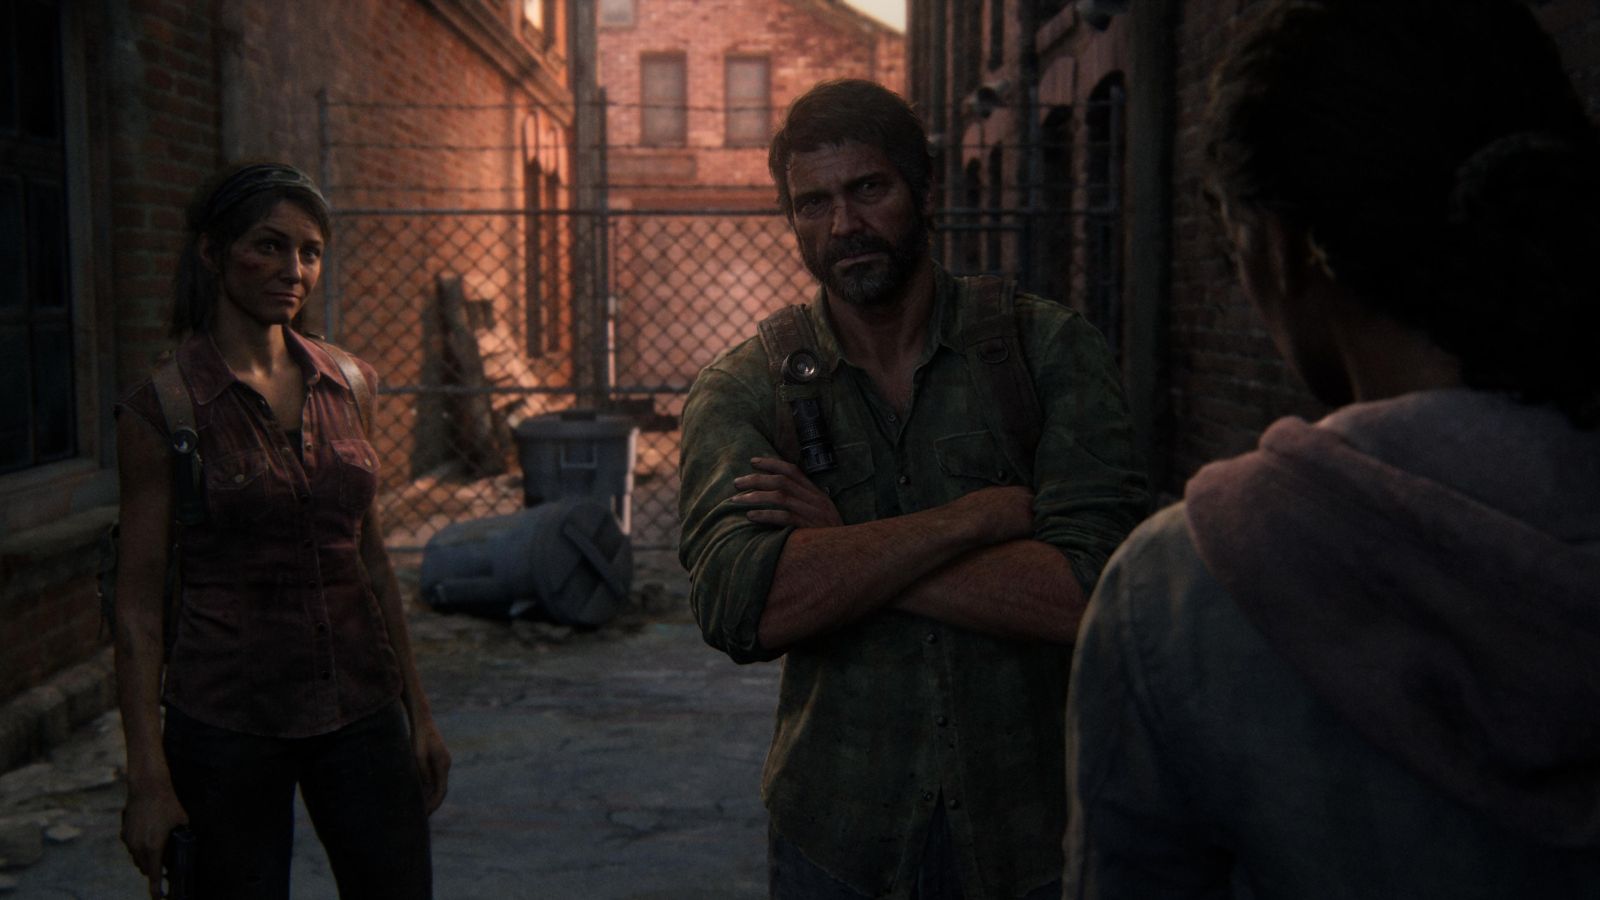 The Last of Us Part 1 Remake Review - A Faithful Remake with Improved  Features - GamerBraves